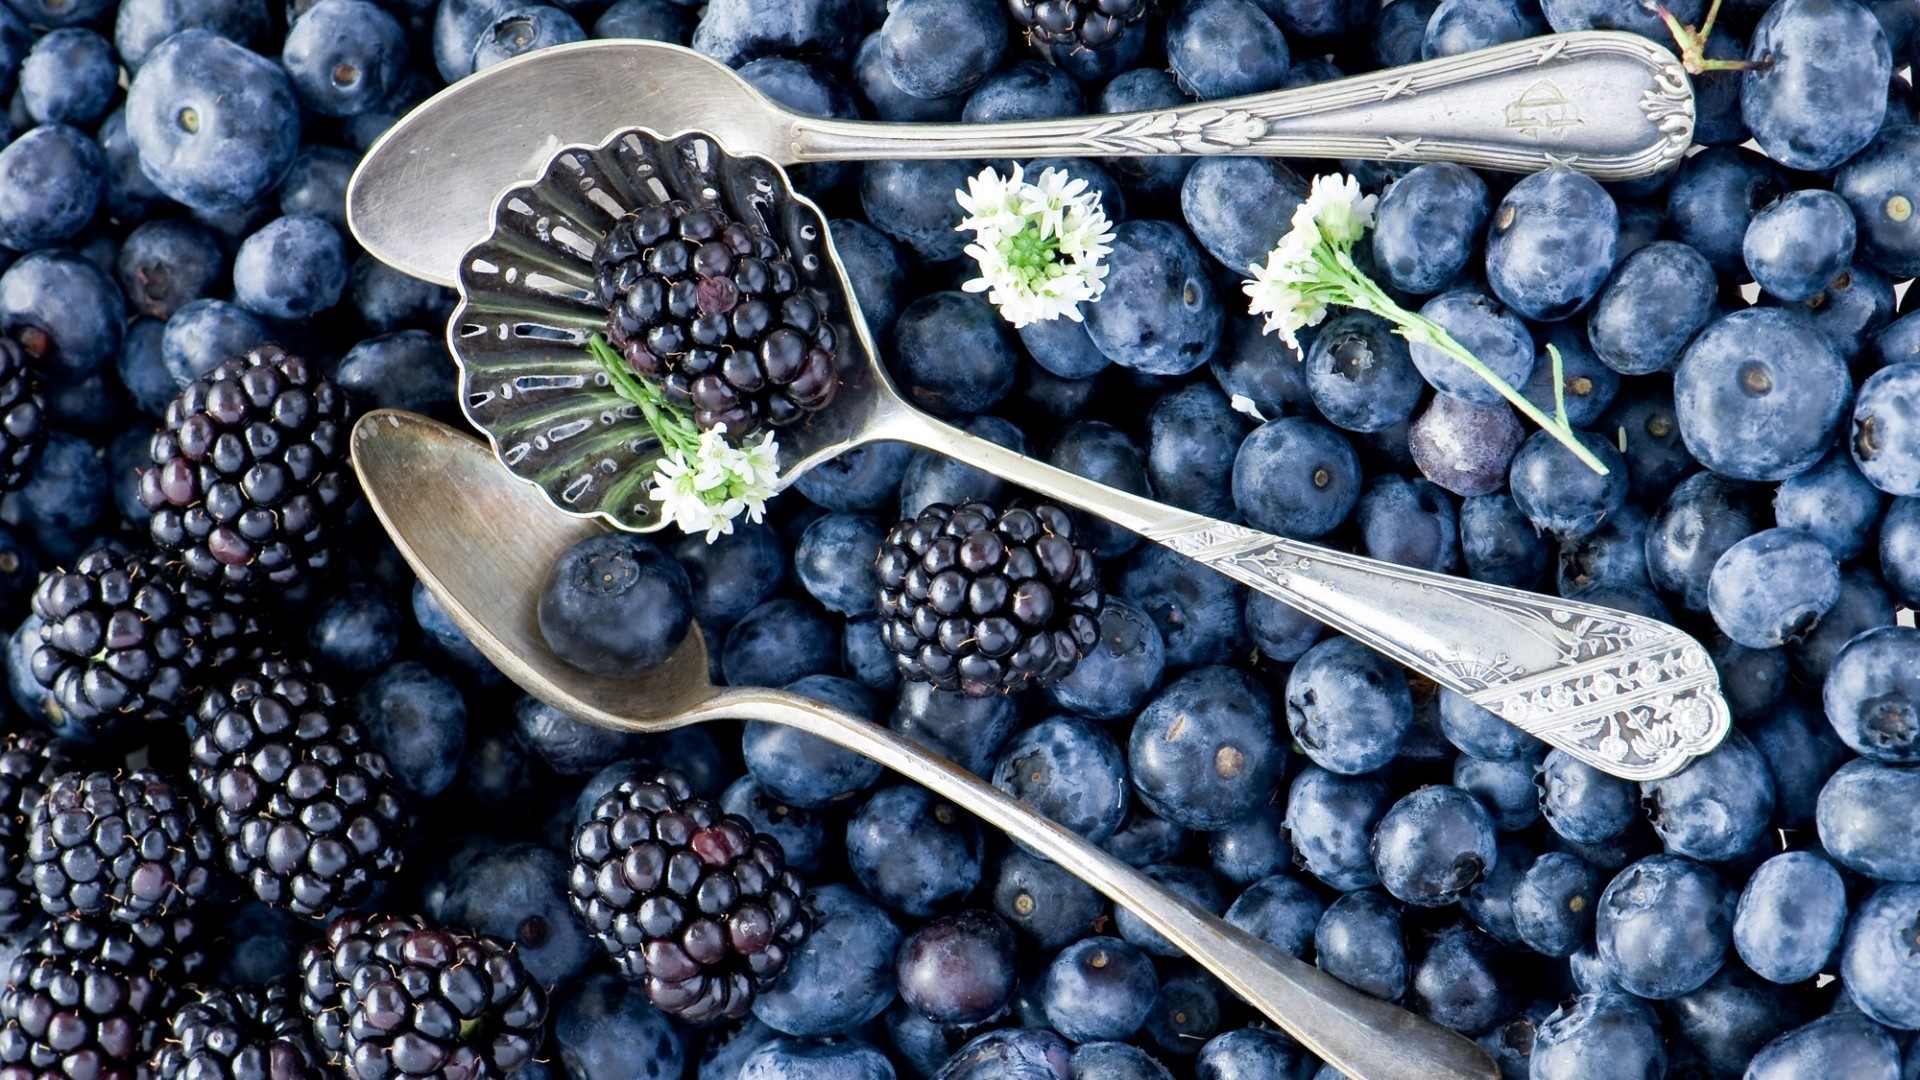 Macro blueberry photography, Berry assortment, Spoonful of berries, Exquisite still life, 1920x1080 Full HD Desktop